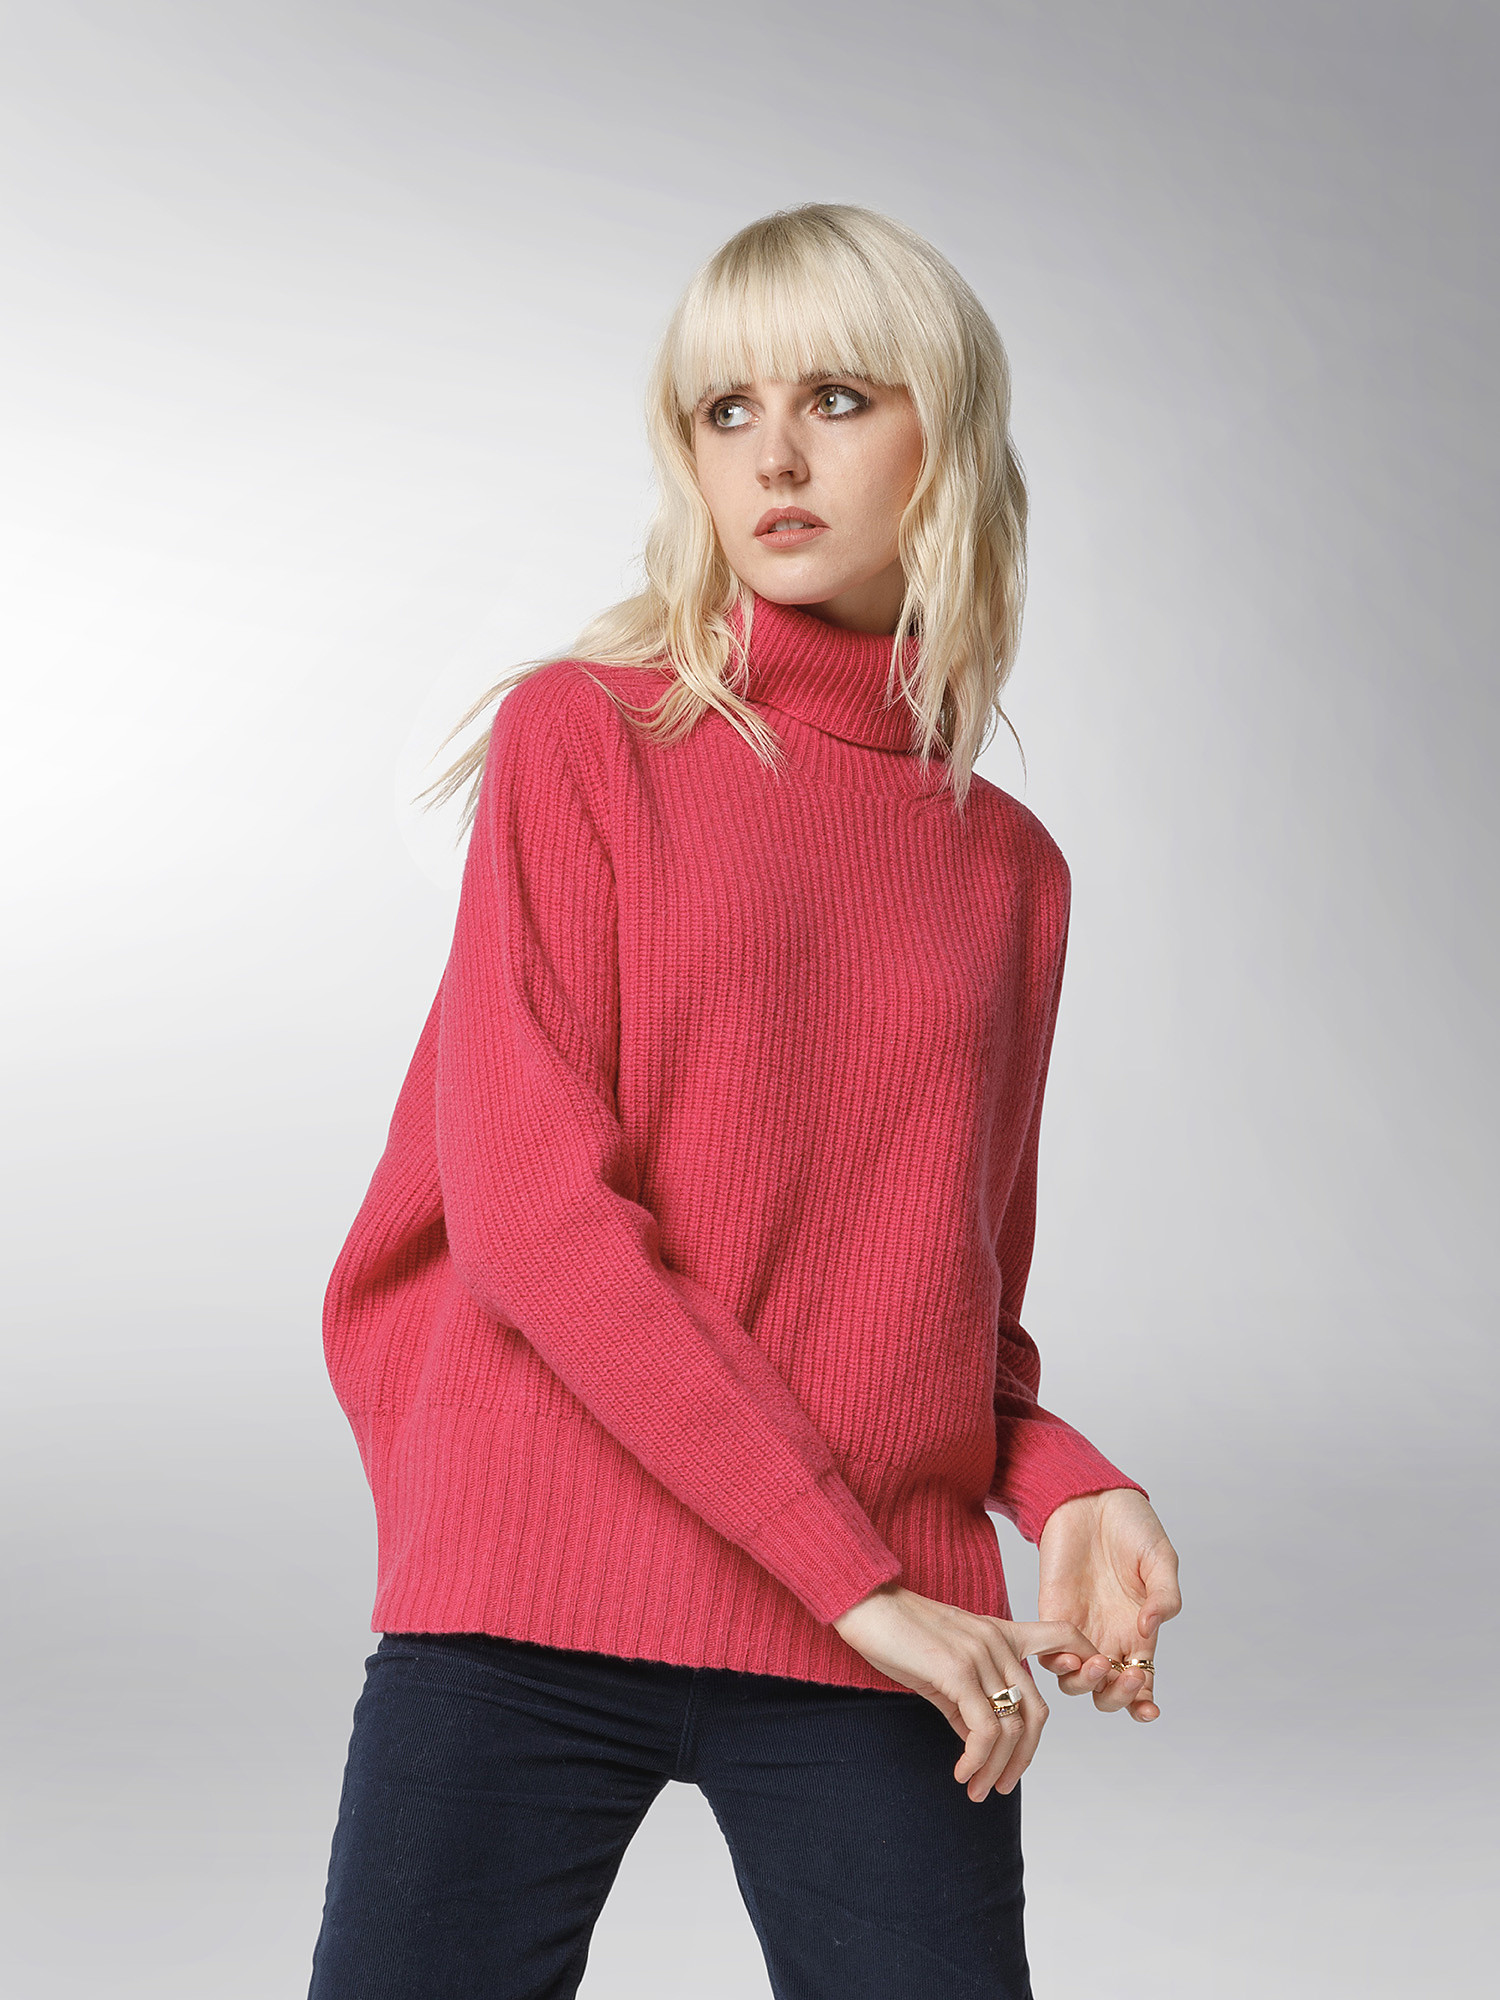 K Collection - Pullover dolcevita in lana cardata, Rosa fuxia, large image number 4